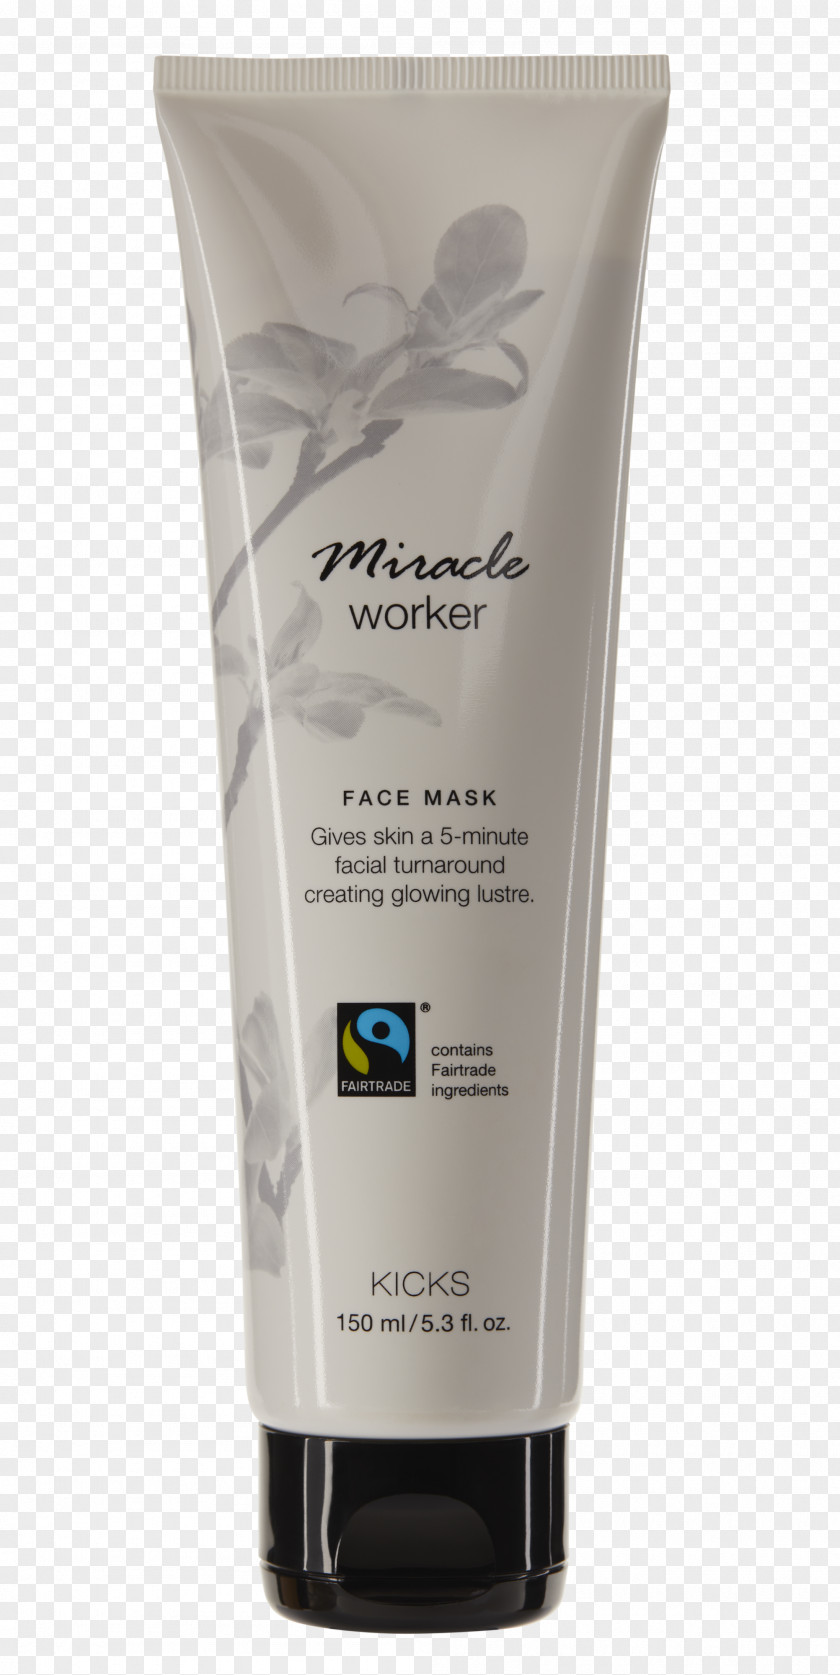 Mask Beauty Cleanser Fairtrade Certification Product Exfoliation Skin PNG